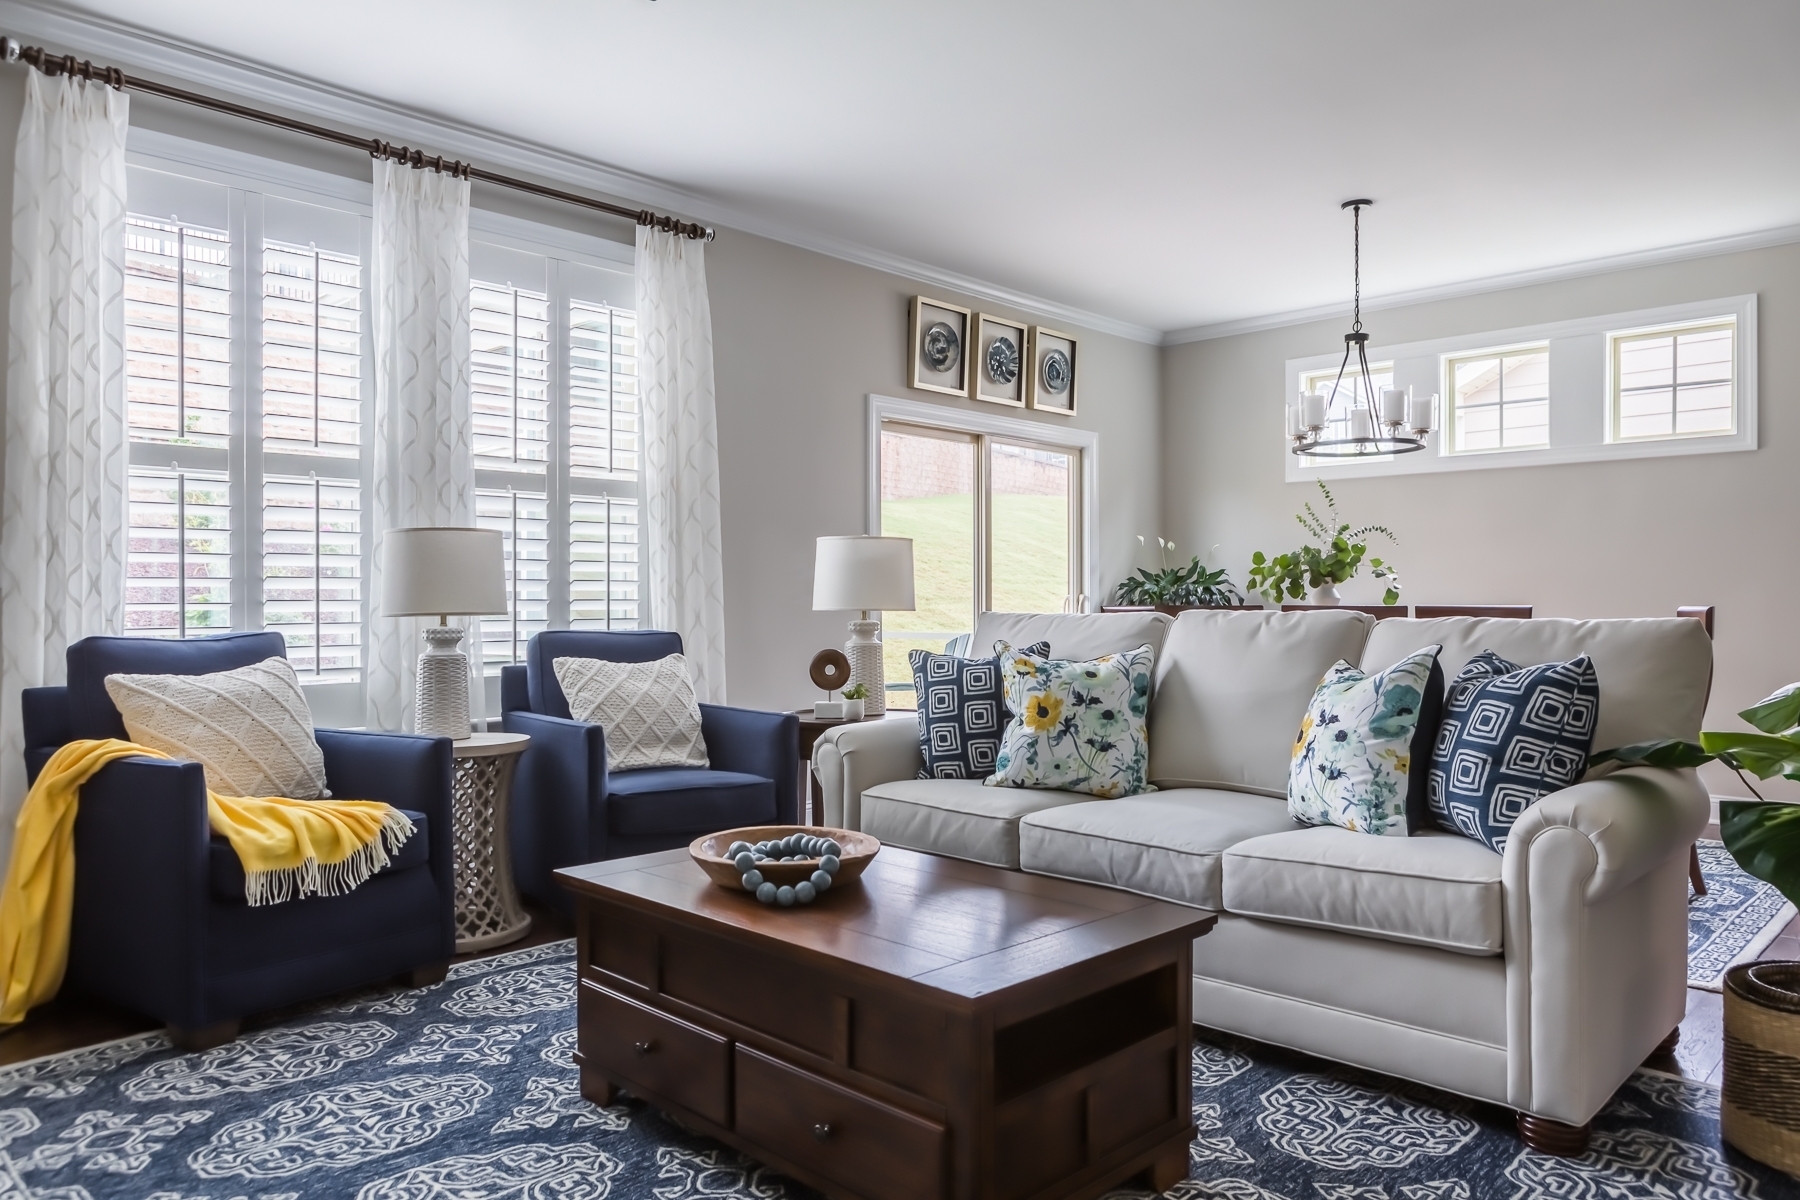 A traditional blue and white living room look: solid color furniture in neutral and deep blue accented by the bright and bold patterns of the accent pillows, patterned rug